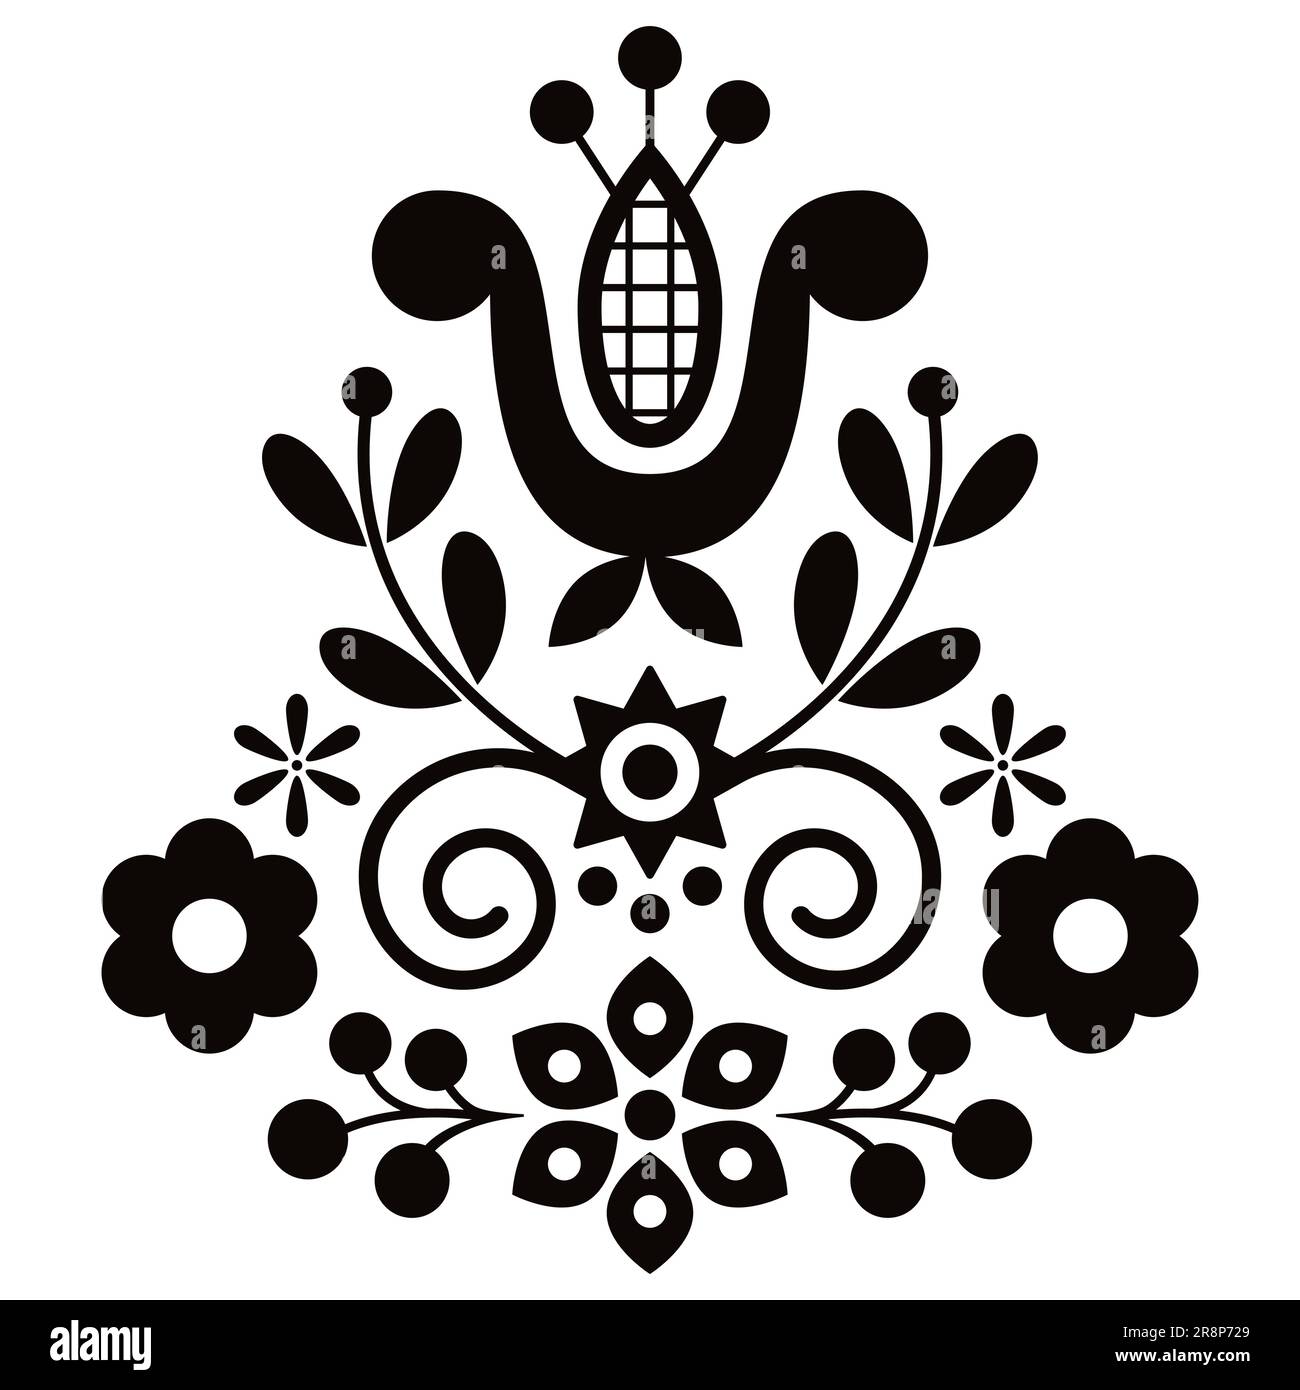 Polish cute folk art vector design wtih flowers and leaves - greeting card or wedding invitation ornament in black and white Stock Vector